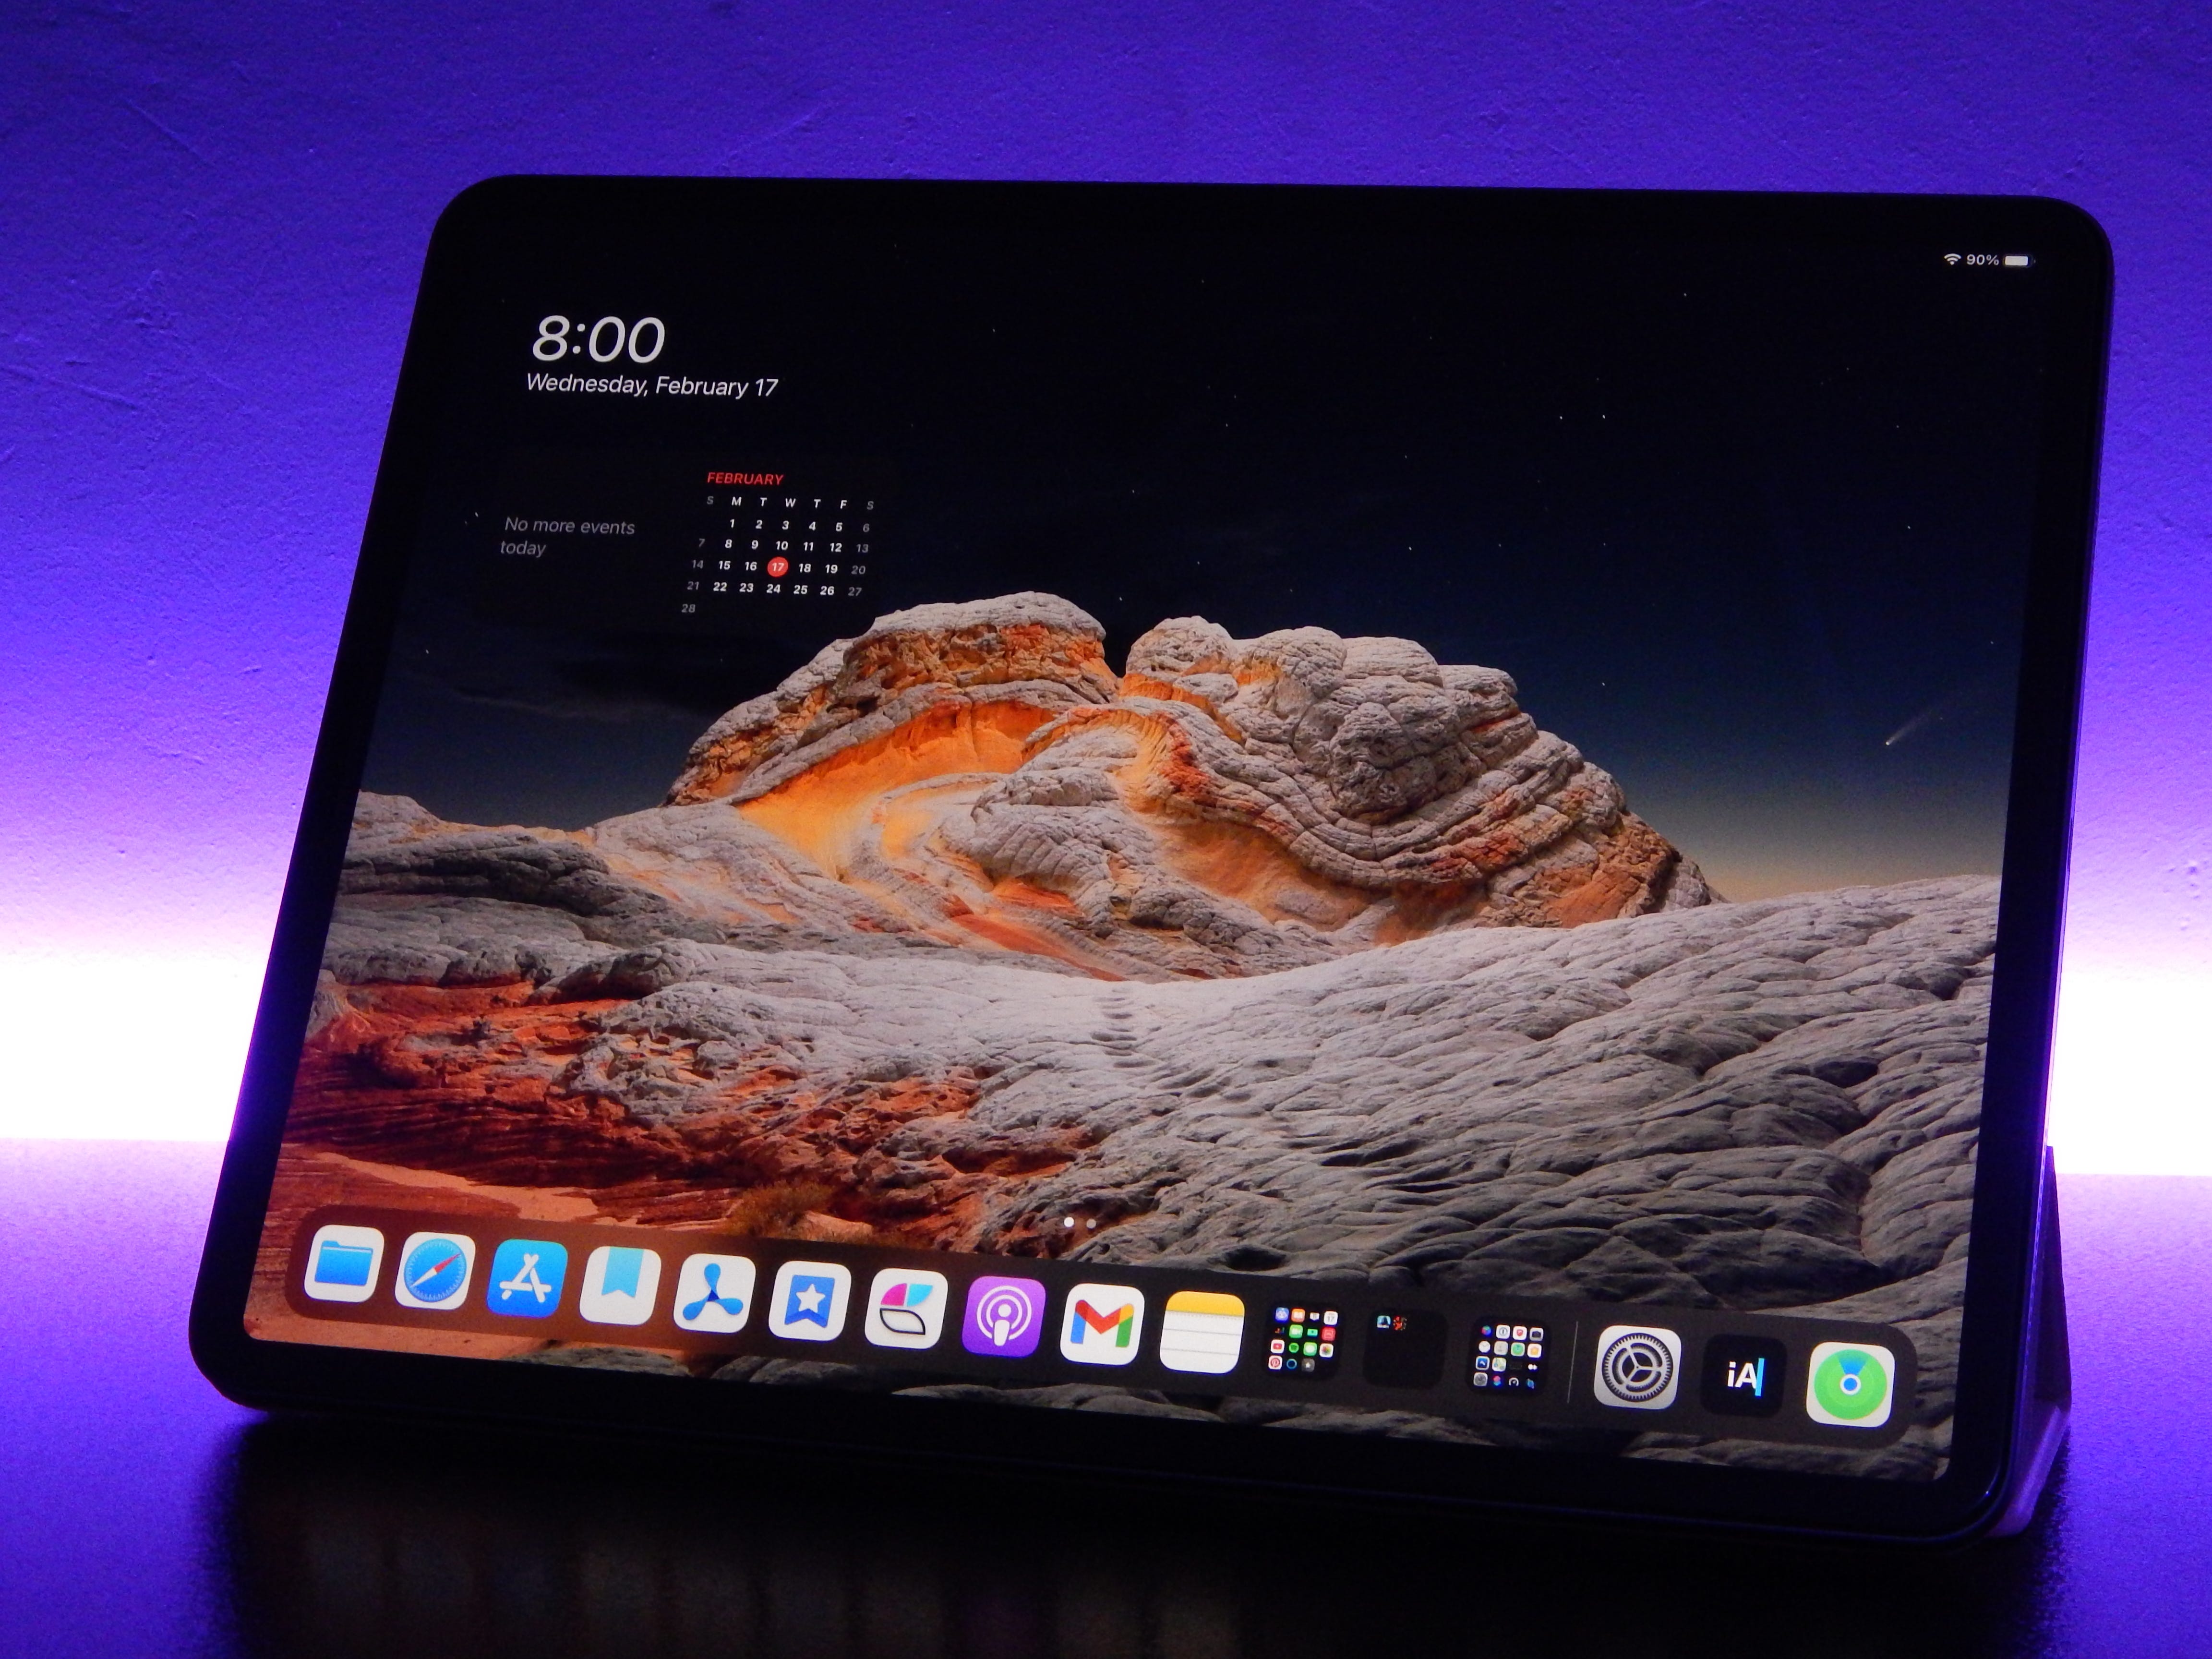 New Apple iPad Pro models out next month; iPads get Xbox video games